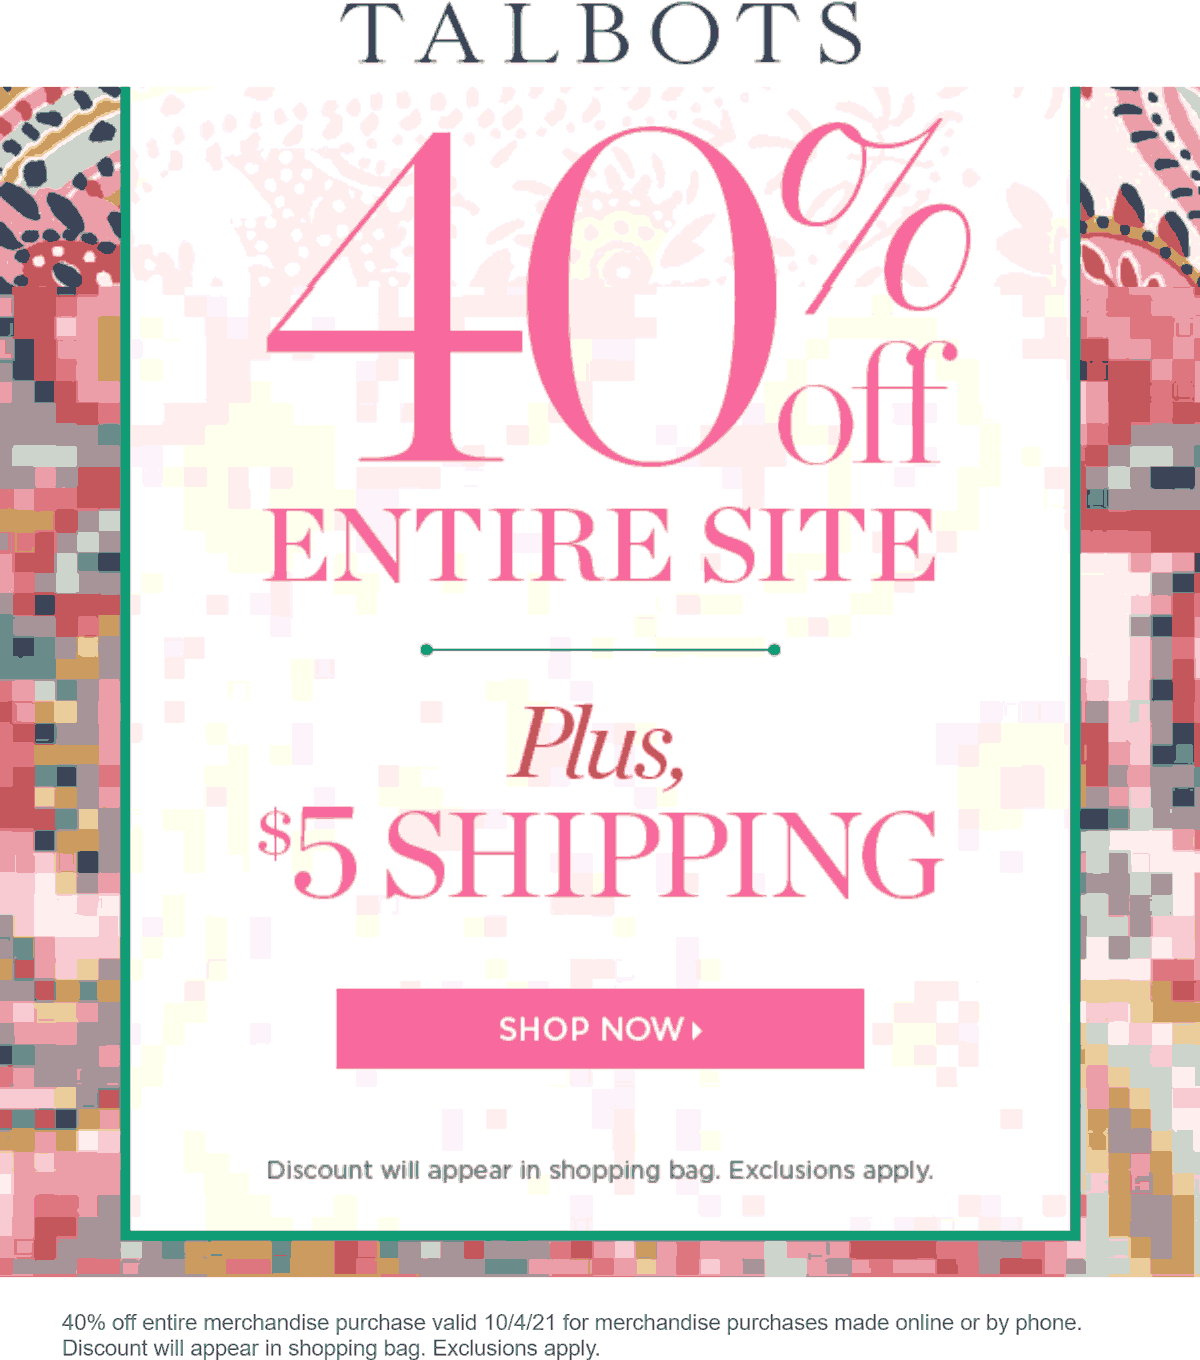 Talbots stores Coupon  40% off everything today online at Talbots #talbots 